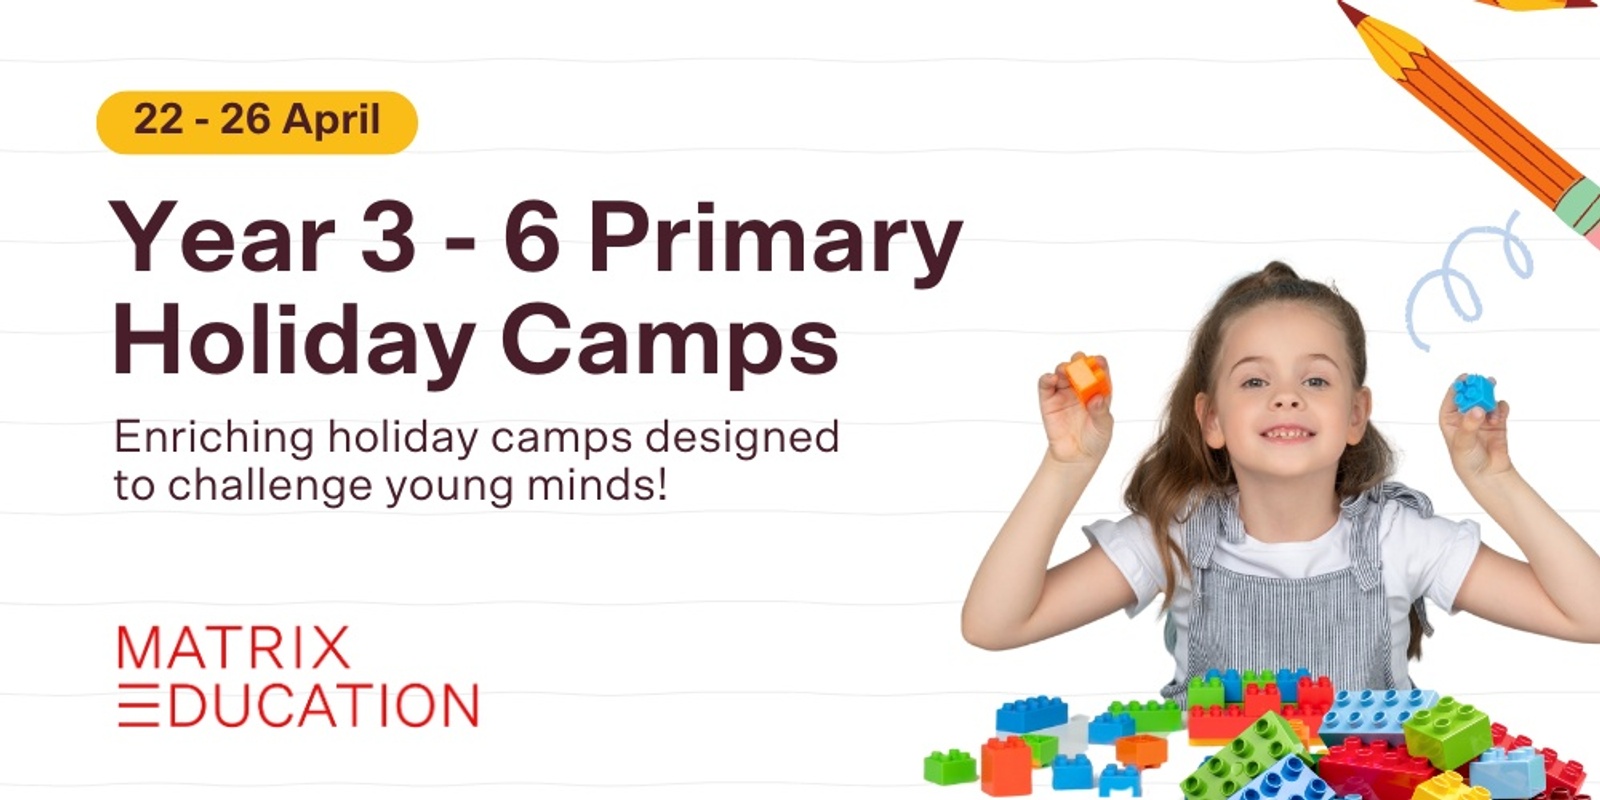 Banner image for Year 3 - 6 Primary School Holiday Camp